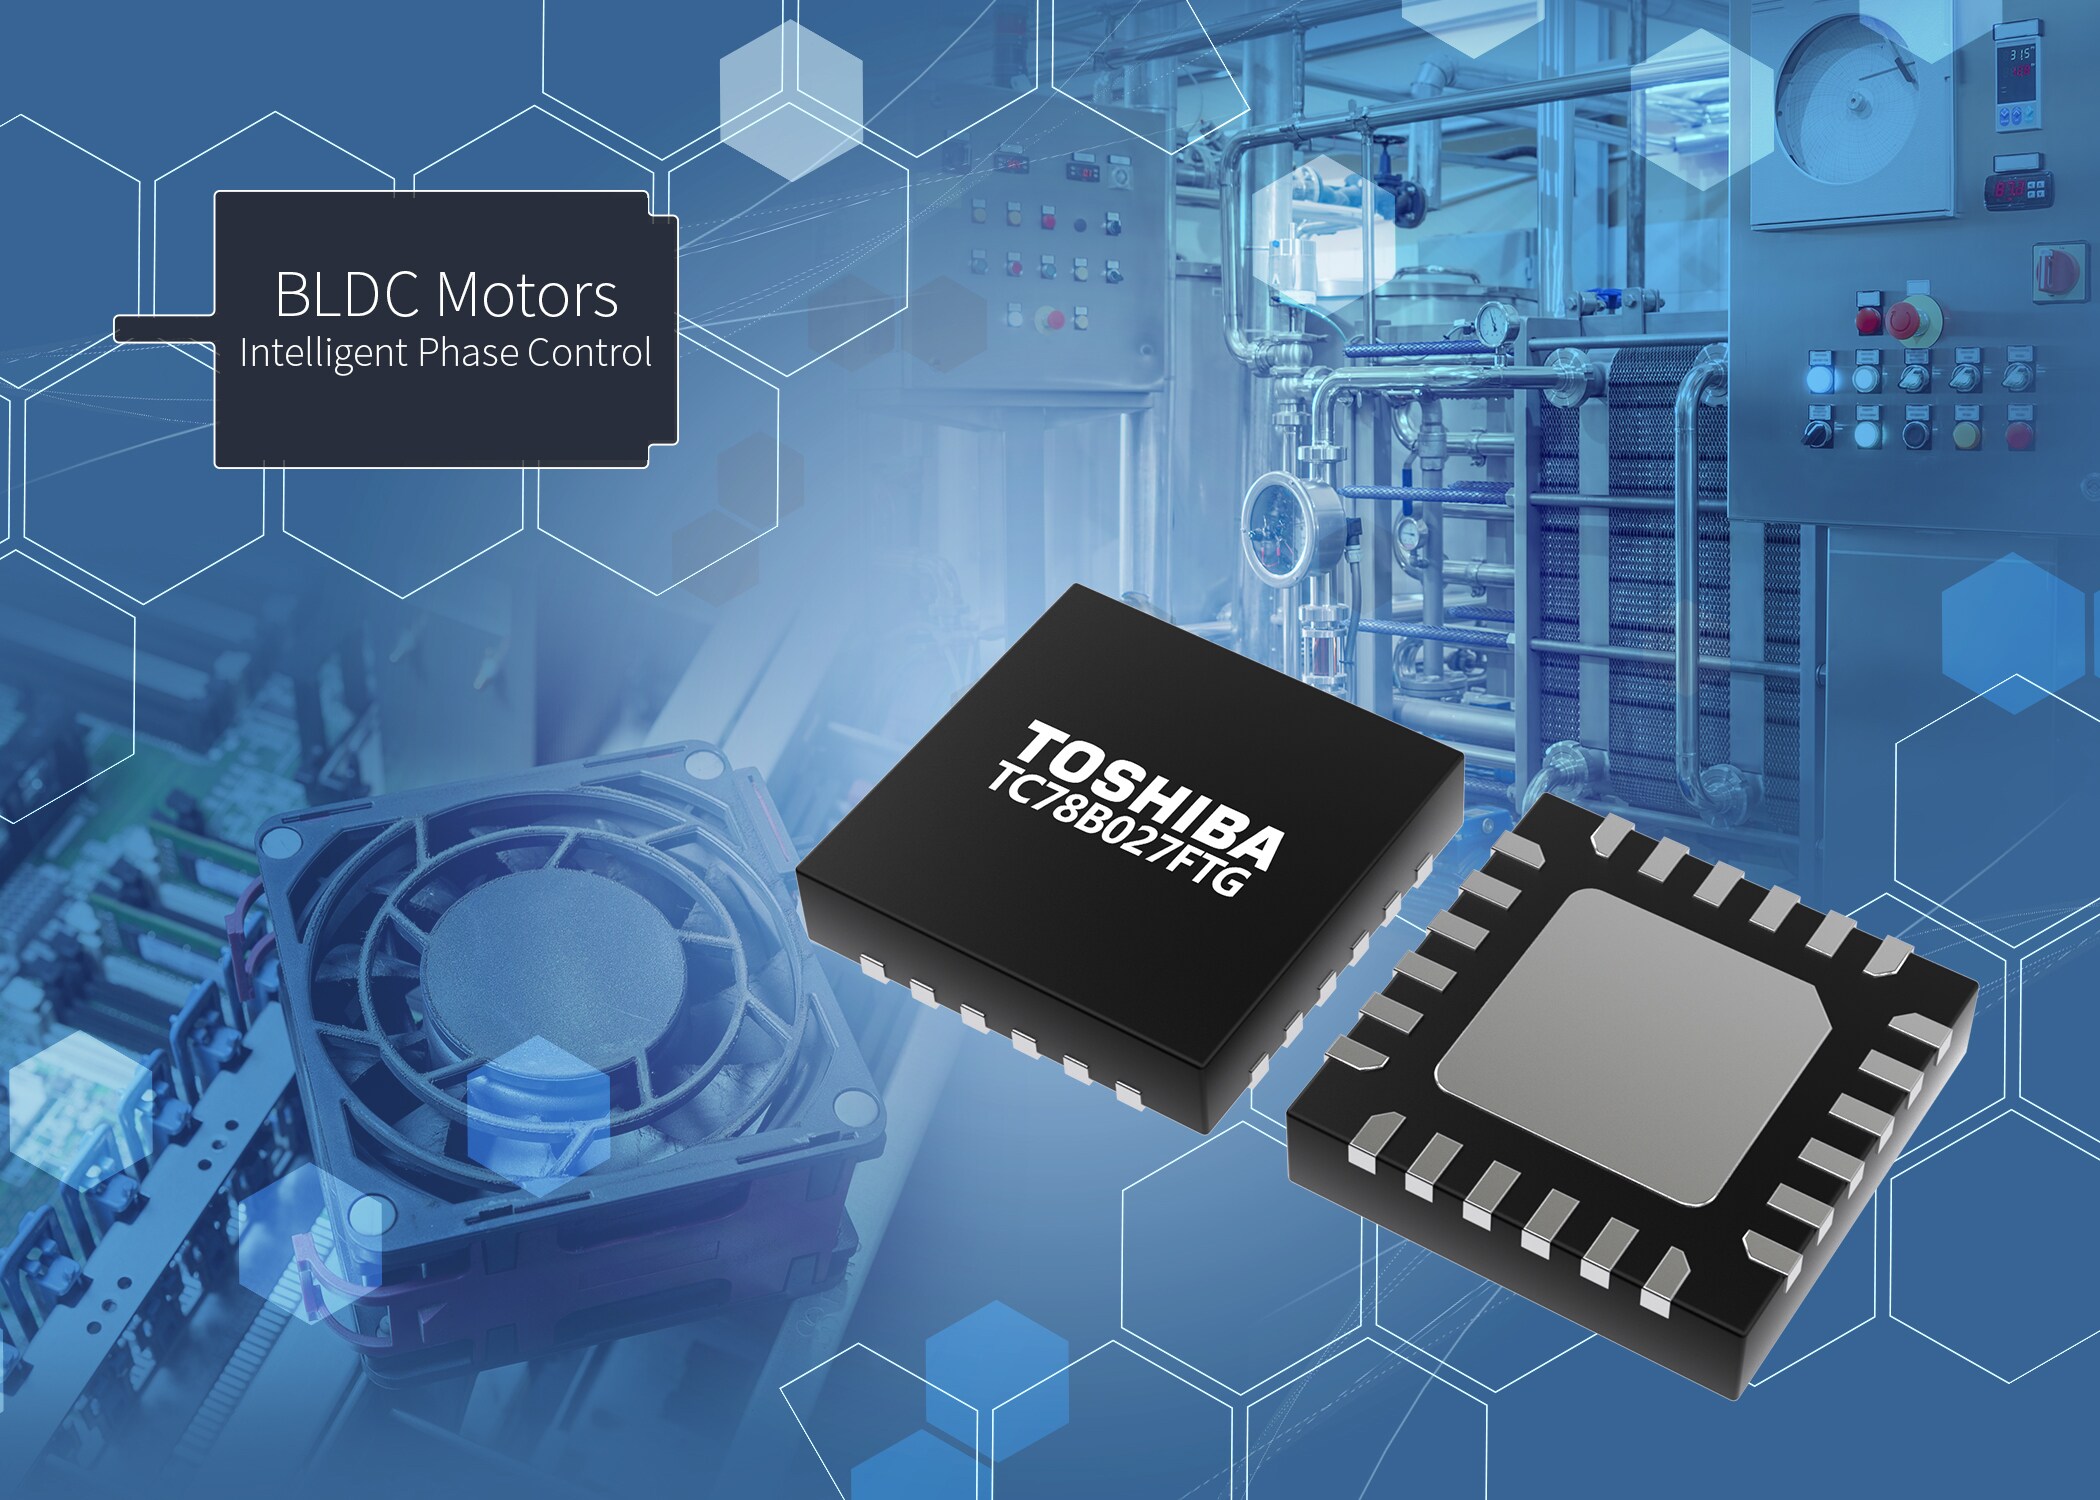 Toshiba announces new three-phase brushless motor control pre-driver IC